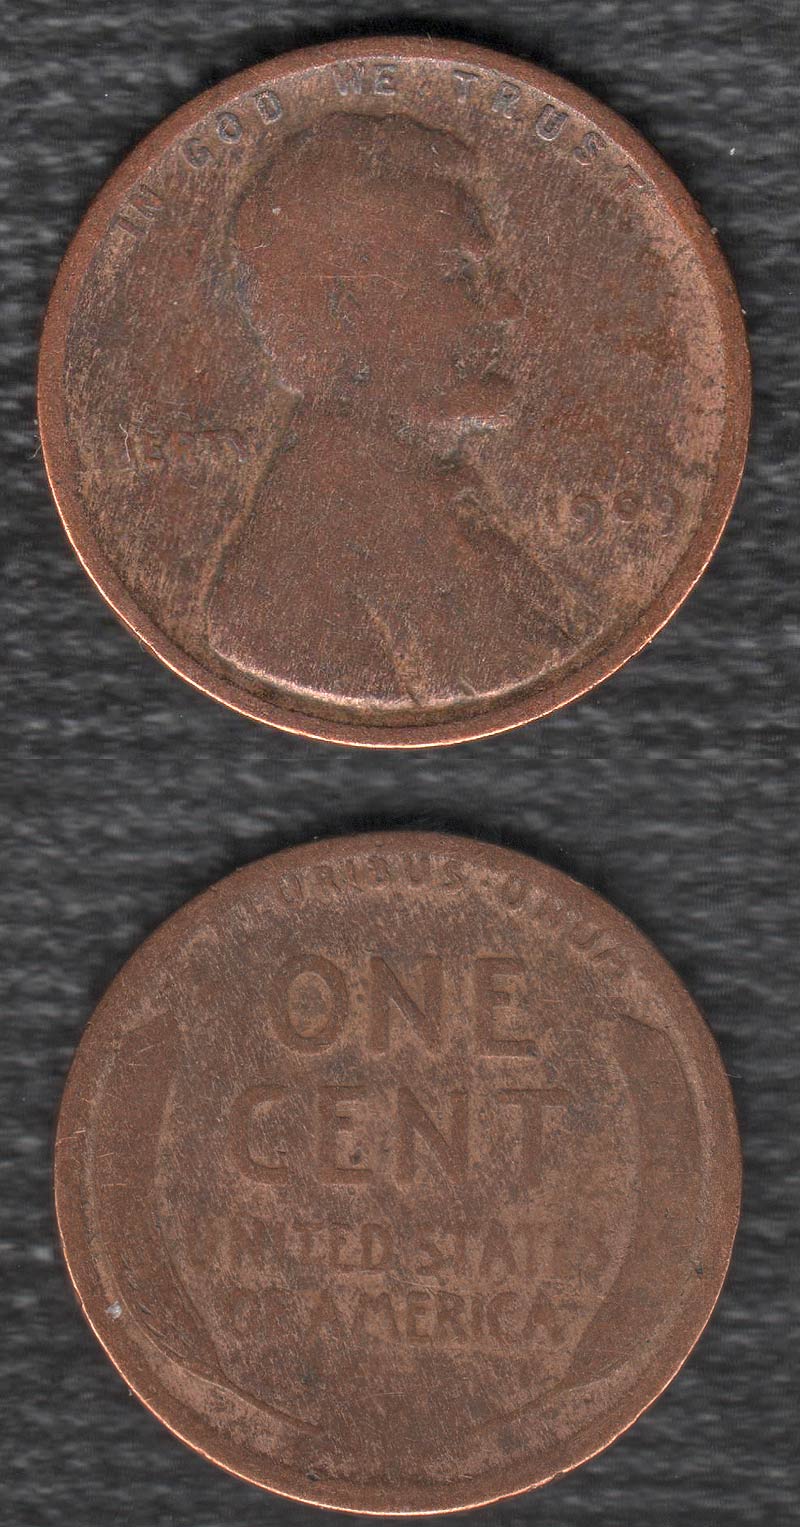 Pulled my oldest coin to date. Unknown year, as is common with the old buffalo  nickels. Curb strip in a part of down that has had the same street layout  for over